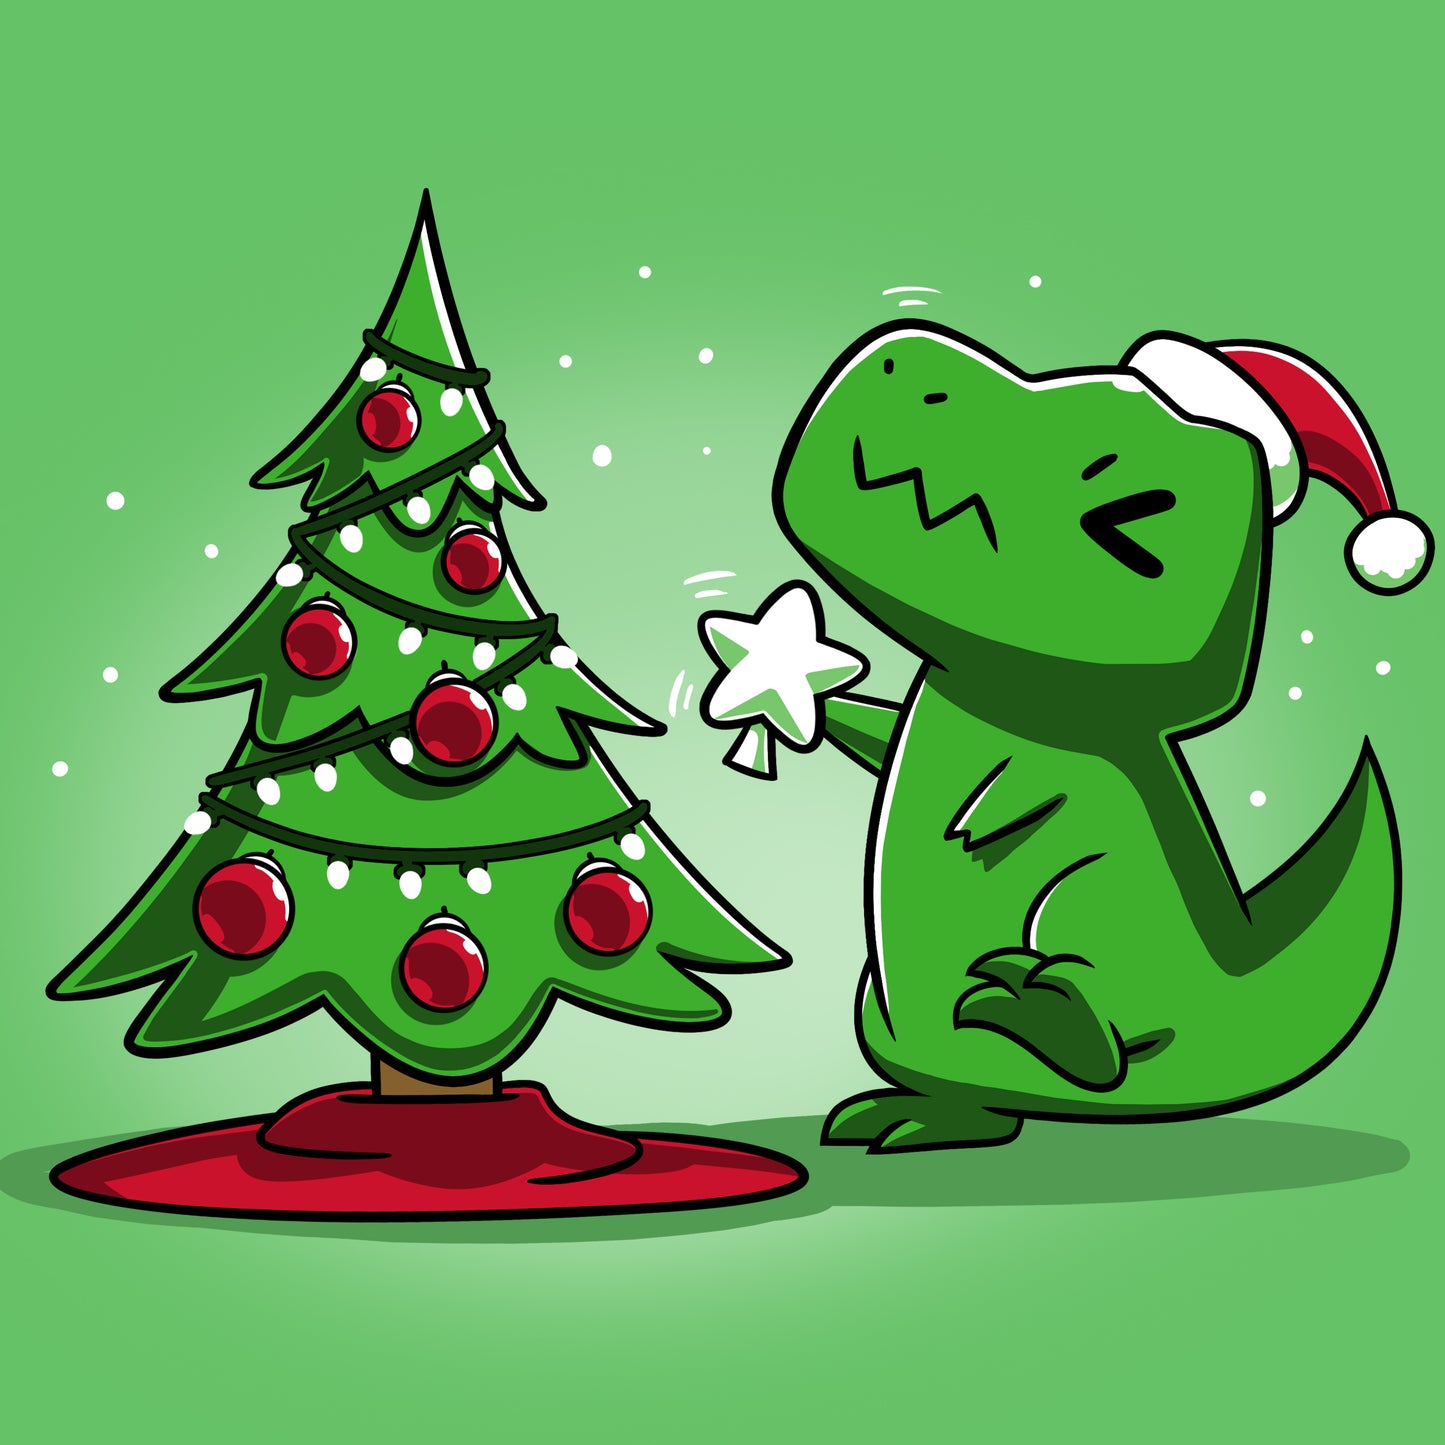 A TeeTurtle Christmas T-Rex with a santa hat standing next to a christmas tree, wearing a festive t-shirt.